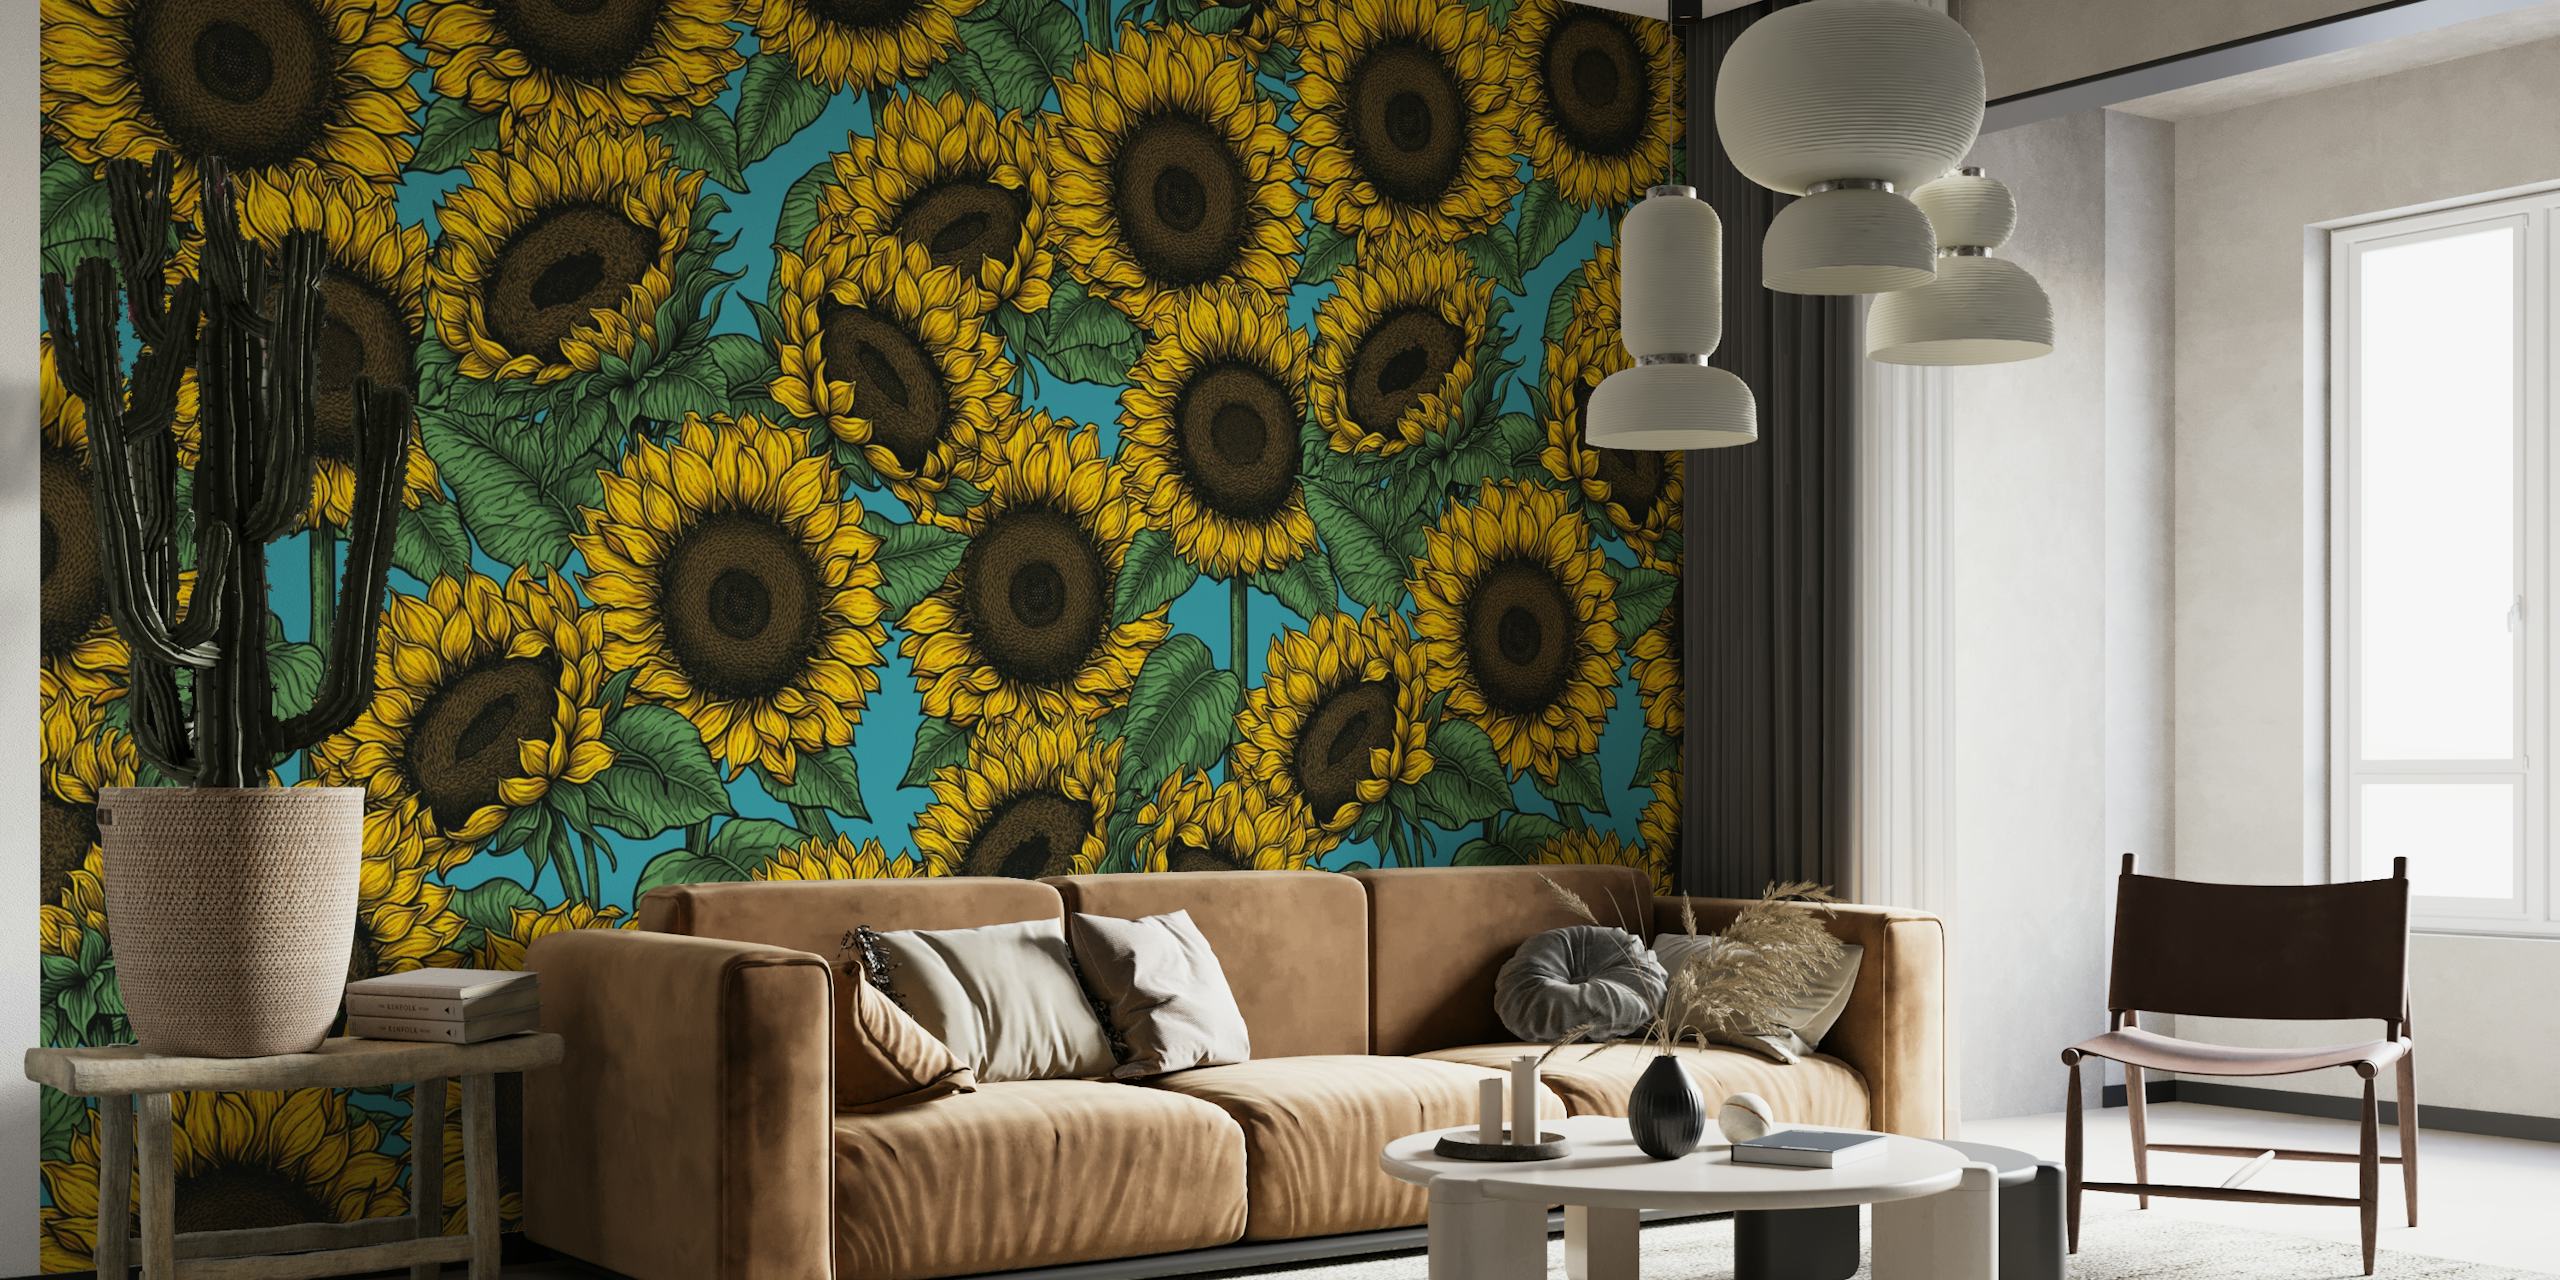 Vibrant sunflower wall mural with a rich, contrasting background, perfect for adding a floral touch to any room.